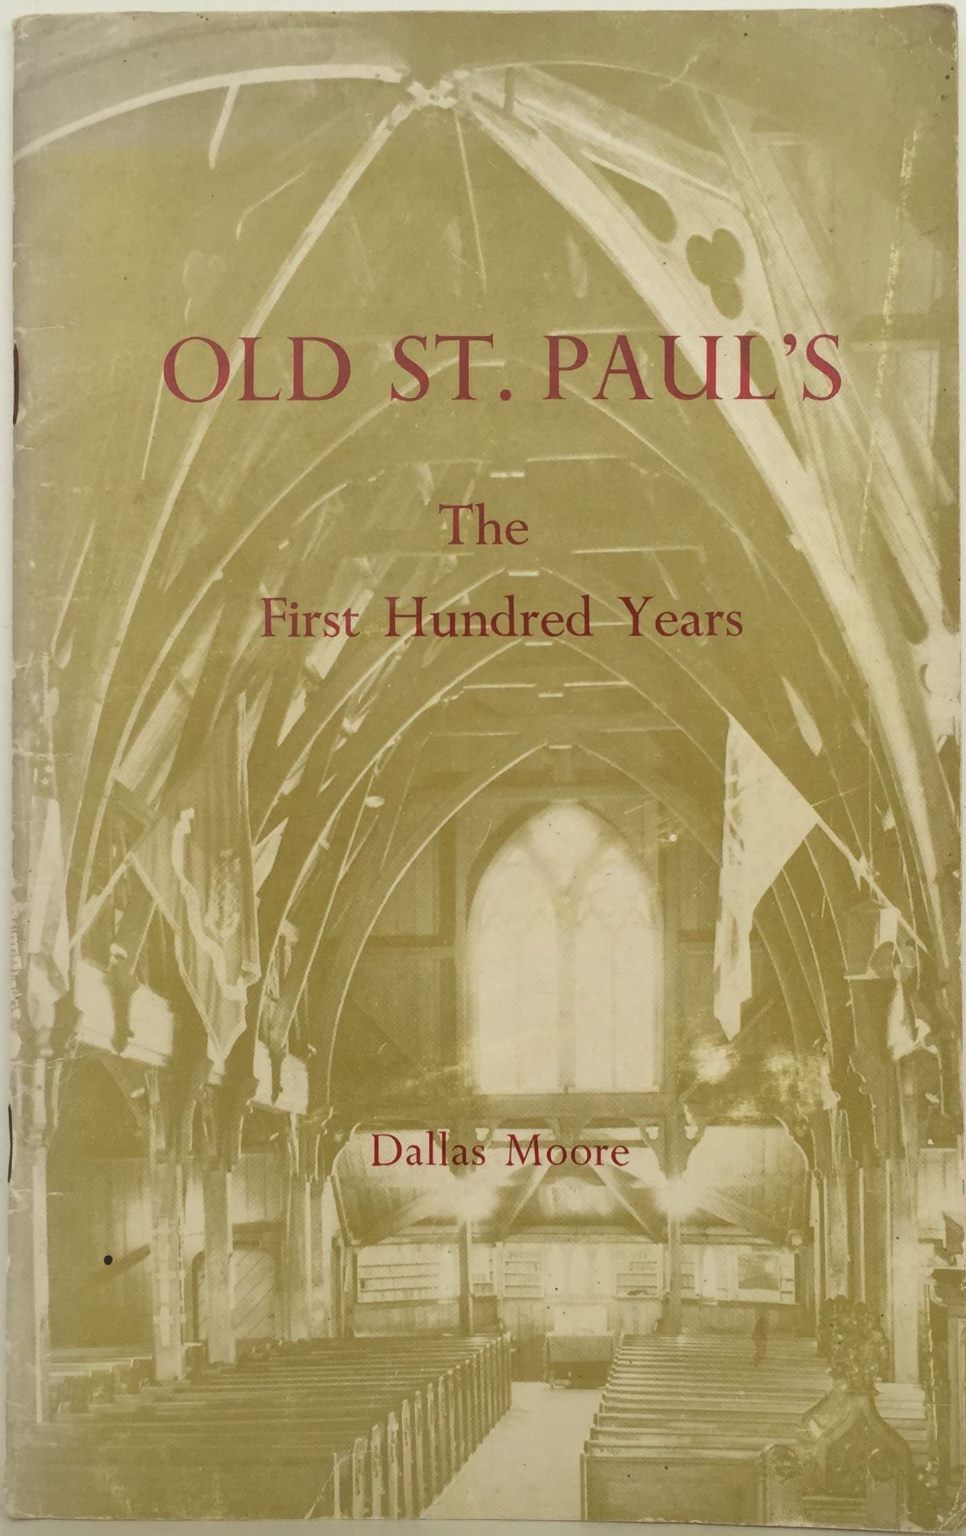 OLD ST. PAUL'S: The First Hundred Years